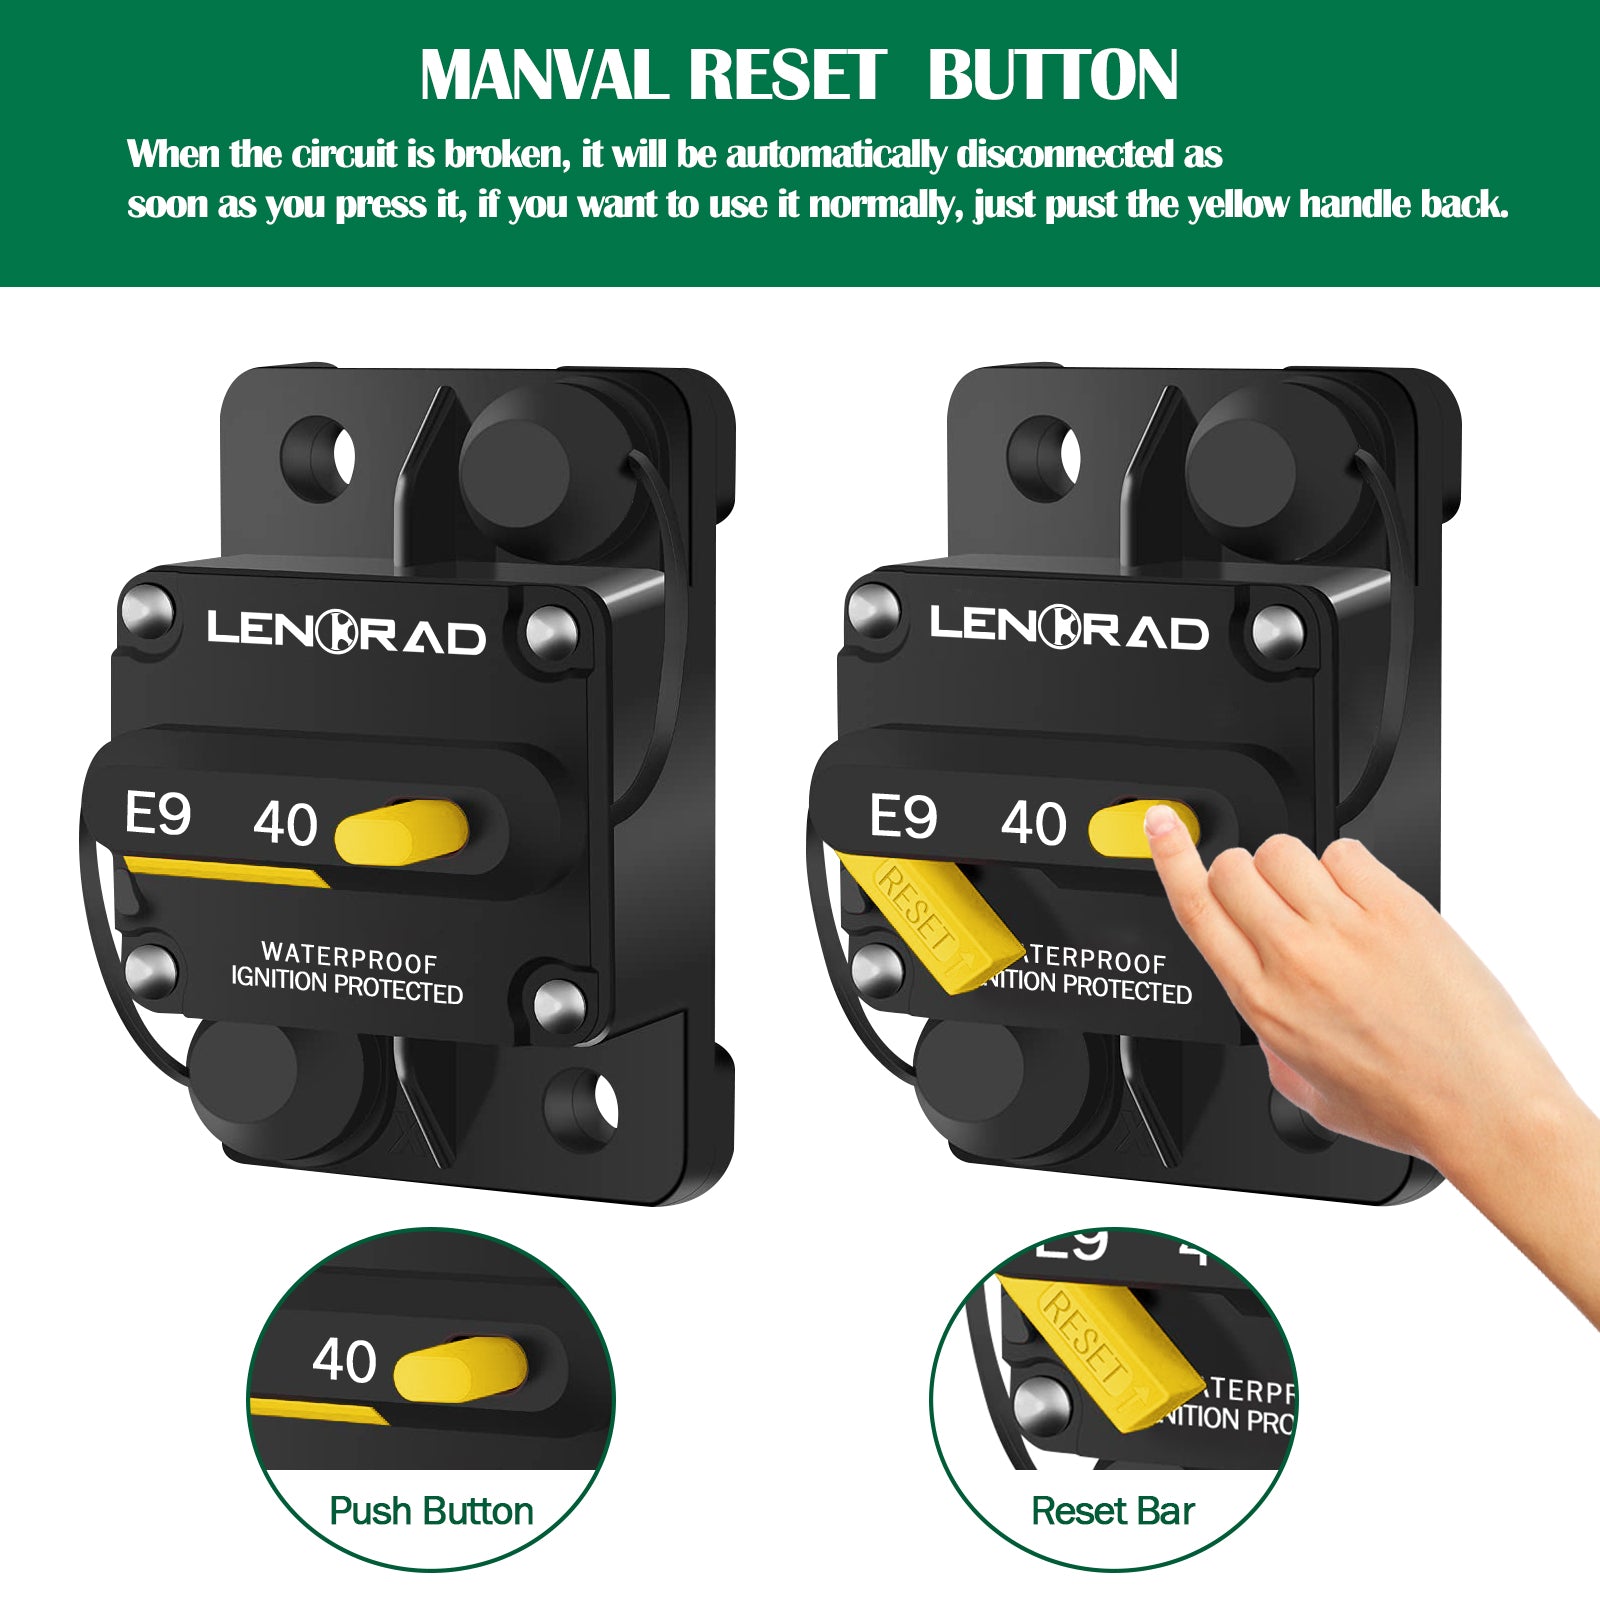 LENKRAD 40 Amp Circuit Breaker 12V with Manual Reset Switch Button for Boat Marine RV Yacht, Boat Circuit Breakers 12V - 48V DC, Waterproof(Surface Mount) - THALASSA